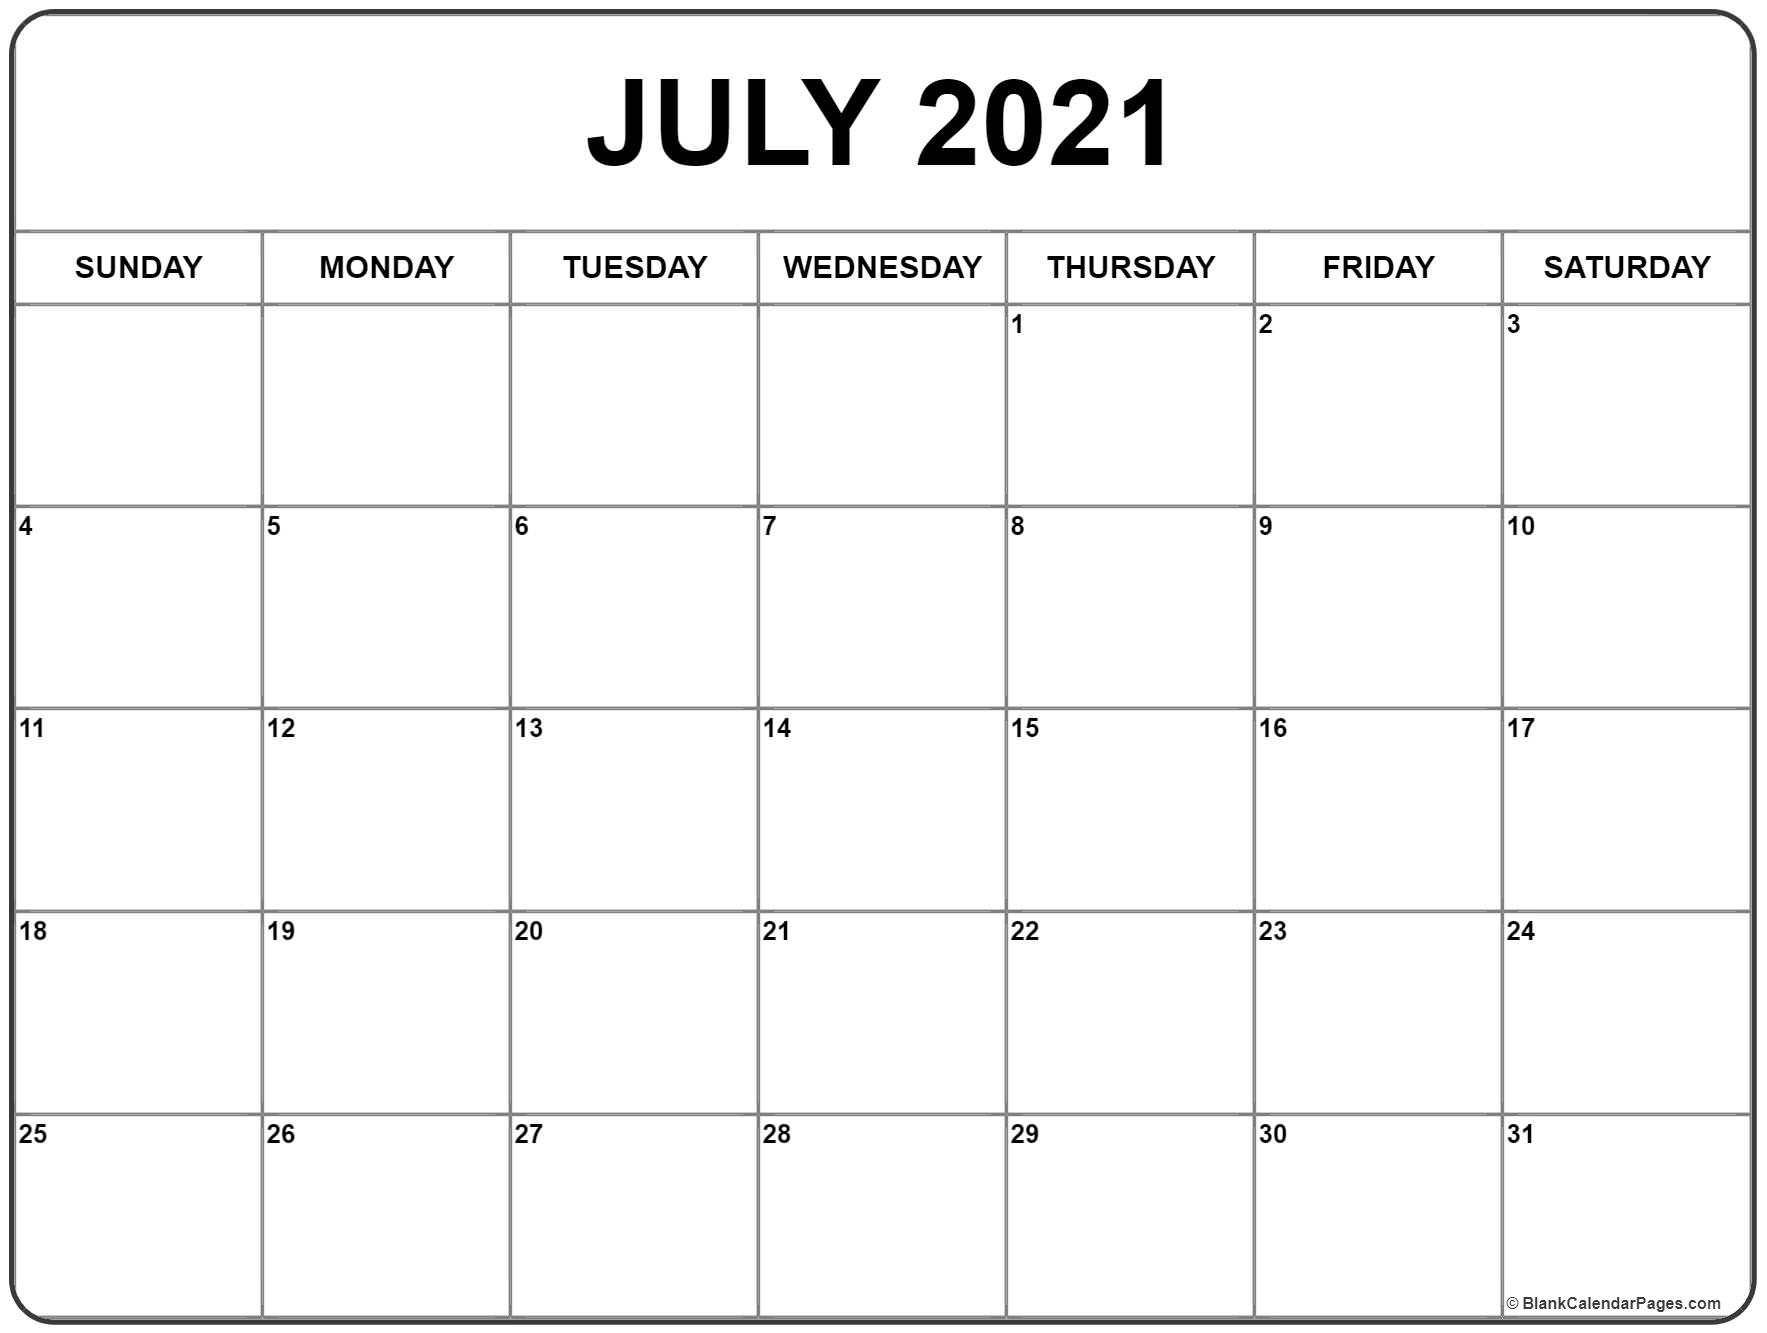 Get Calendar Page 2021 June And July